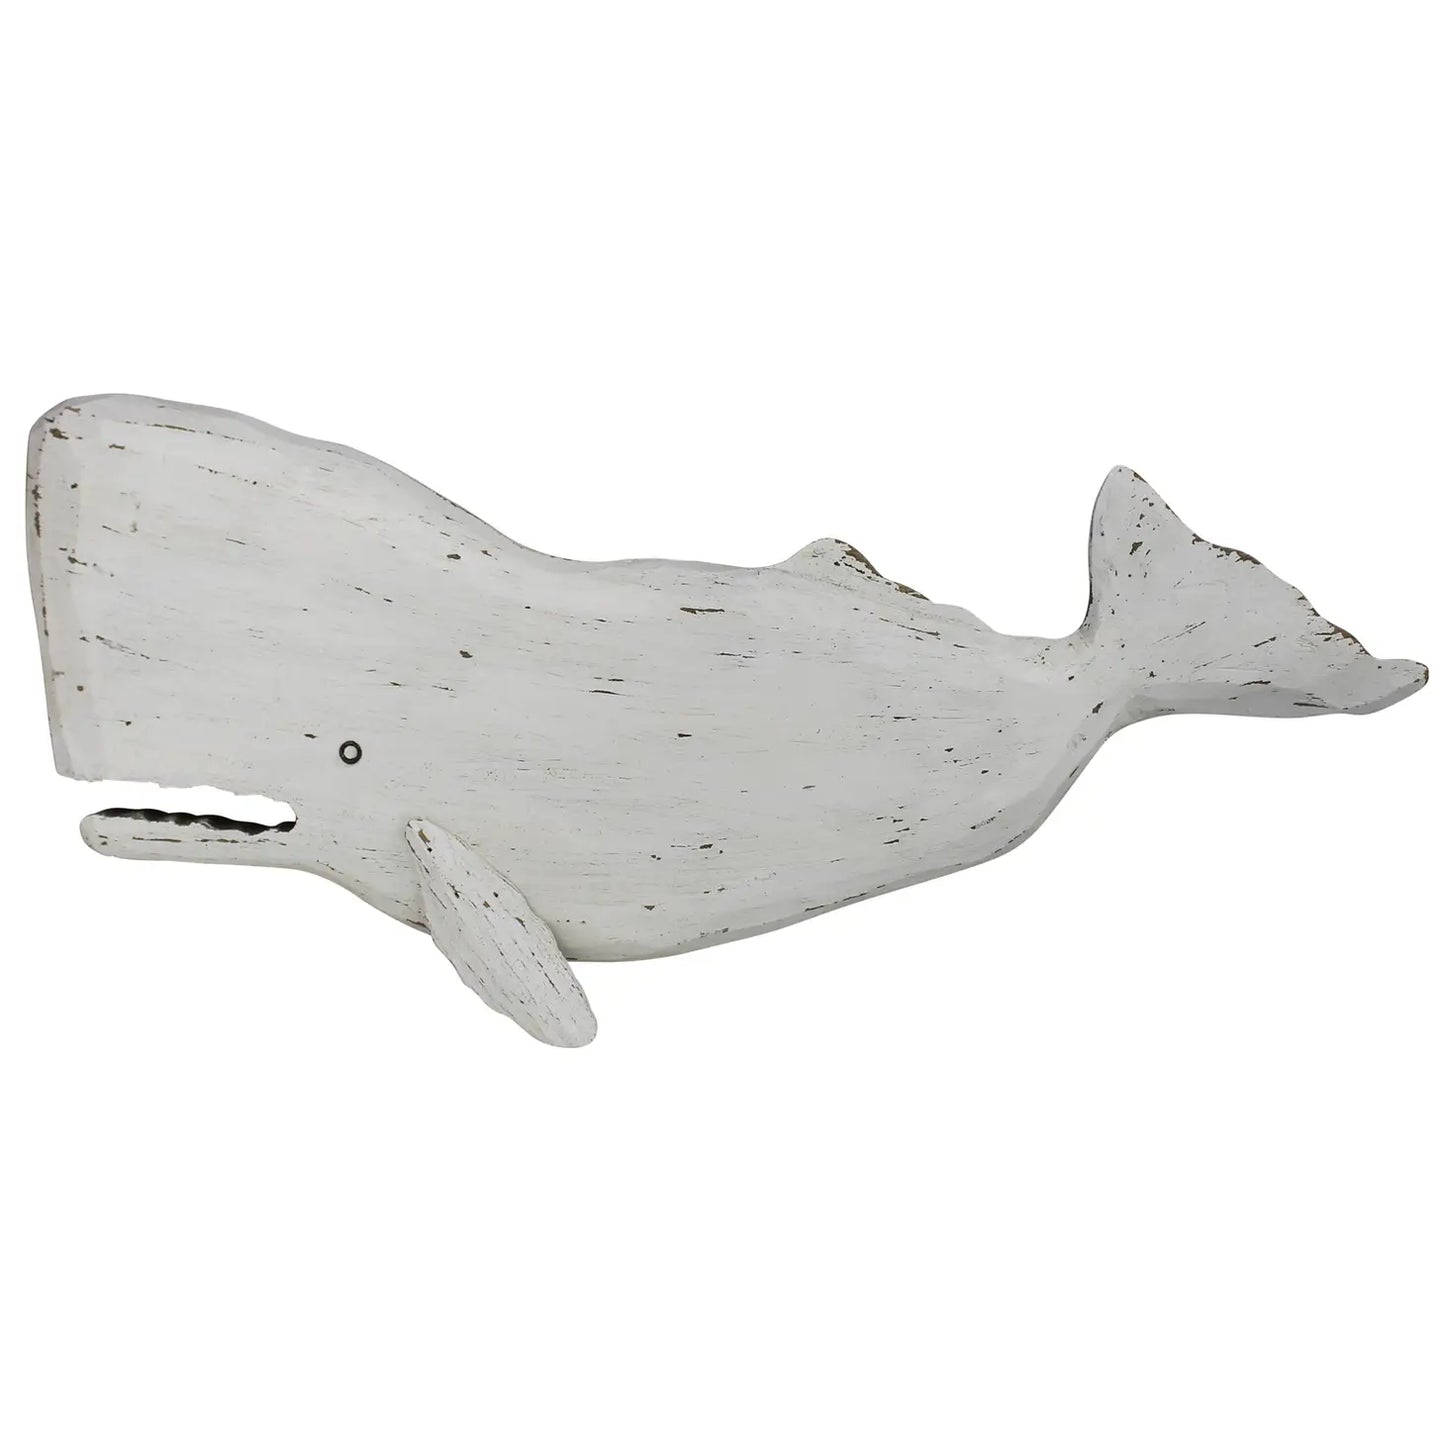 Melville Sperm Whale, Wood, White